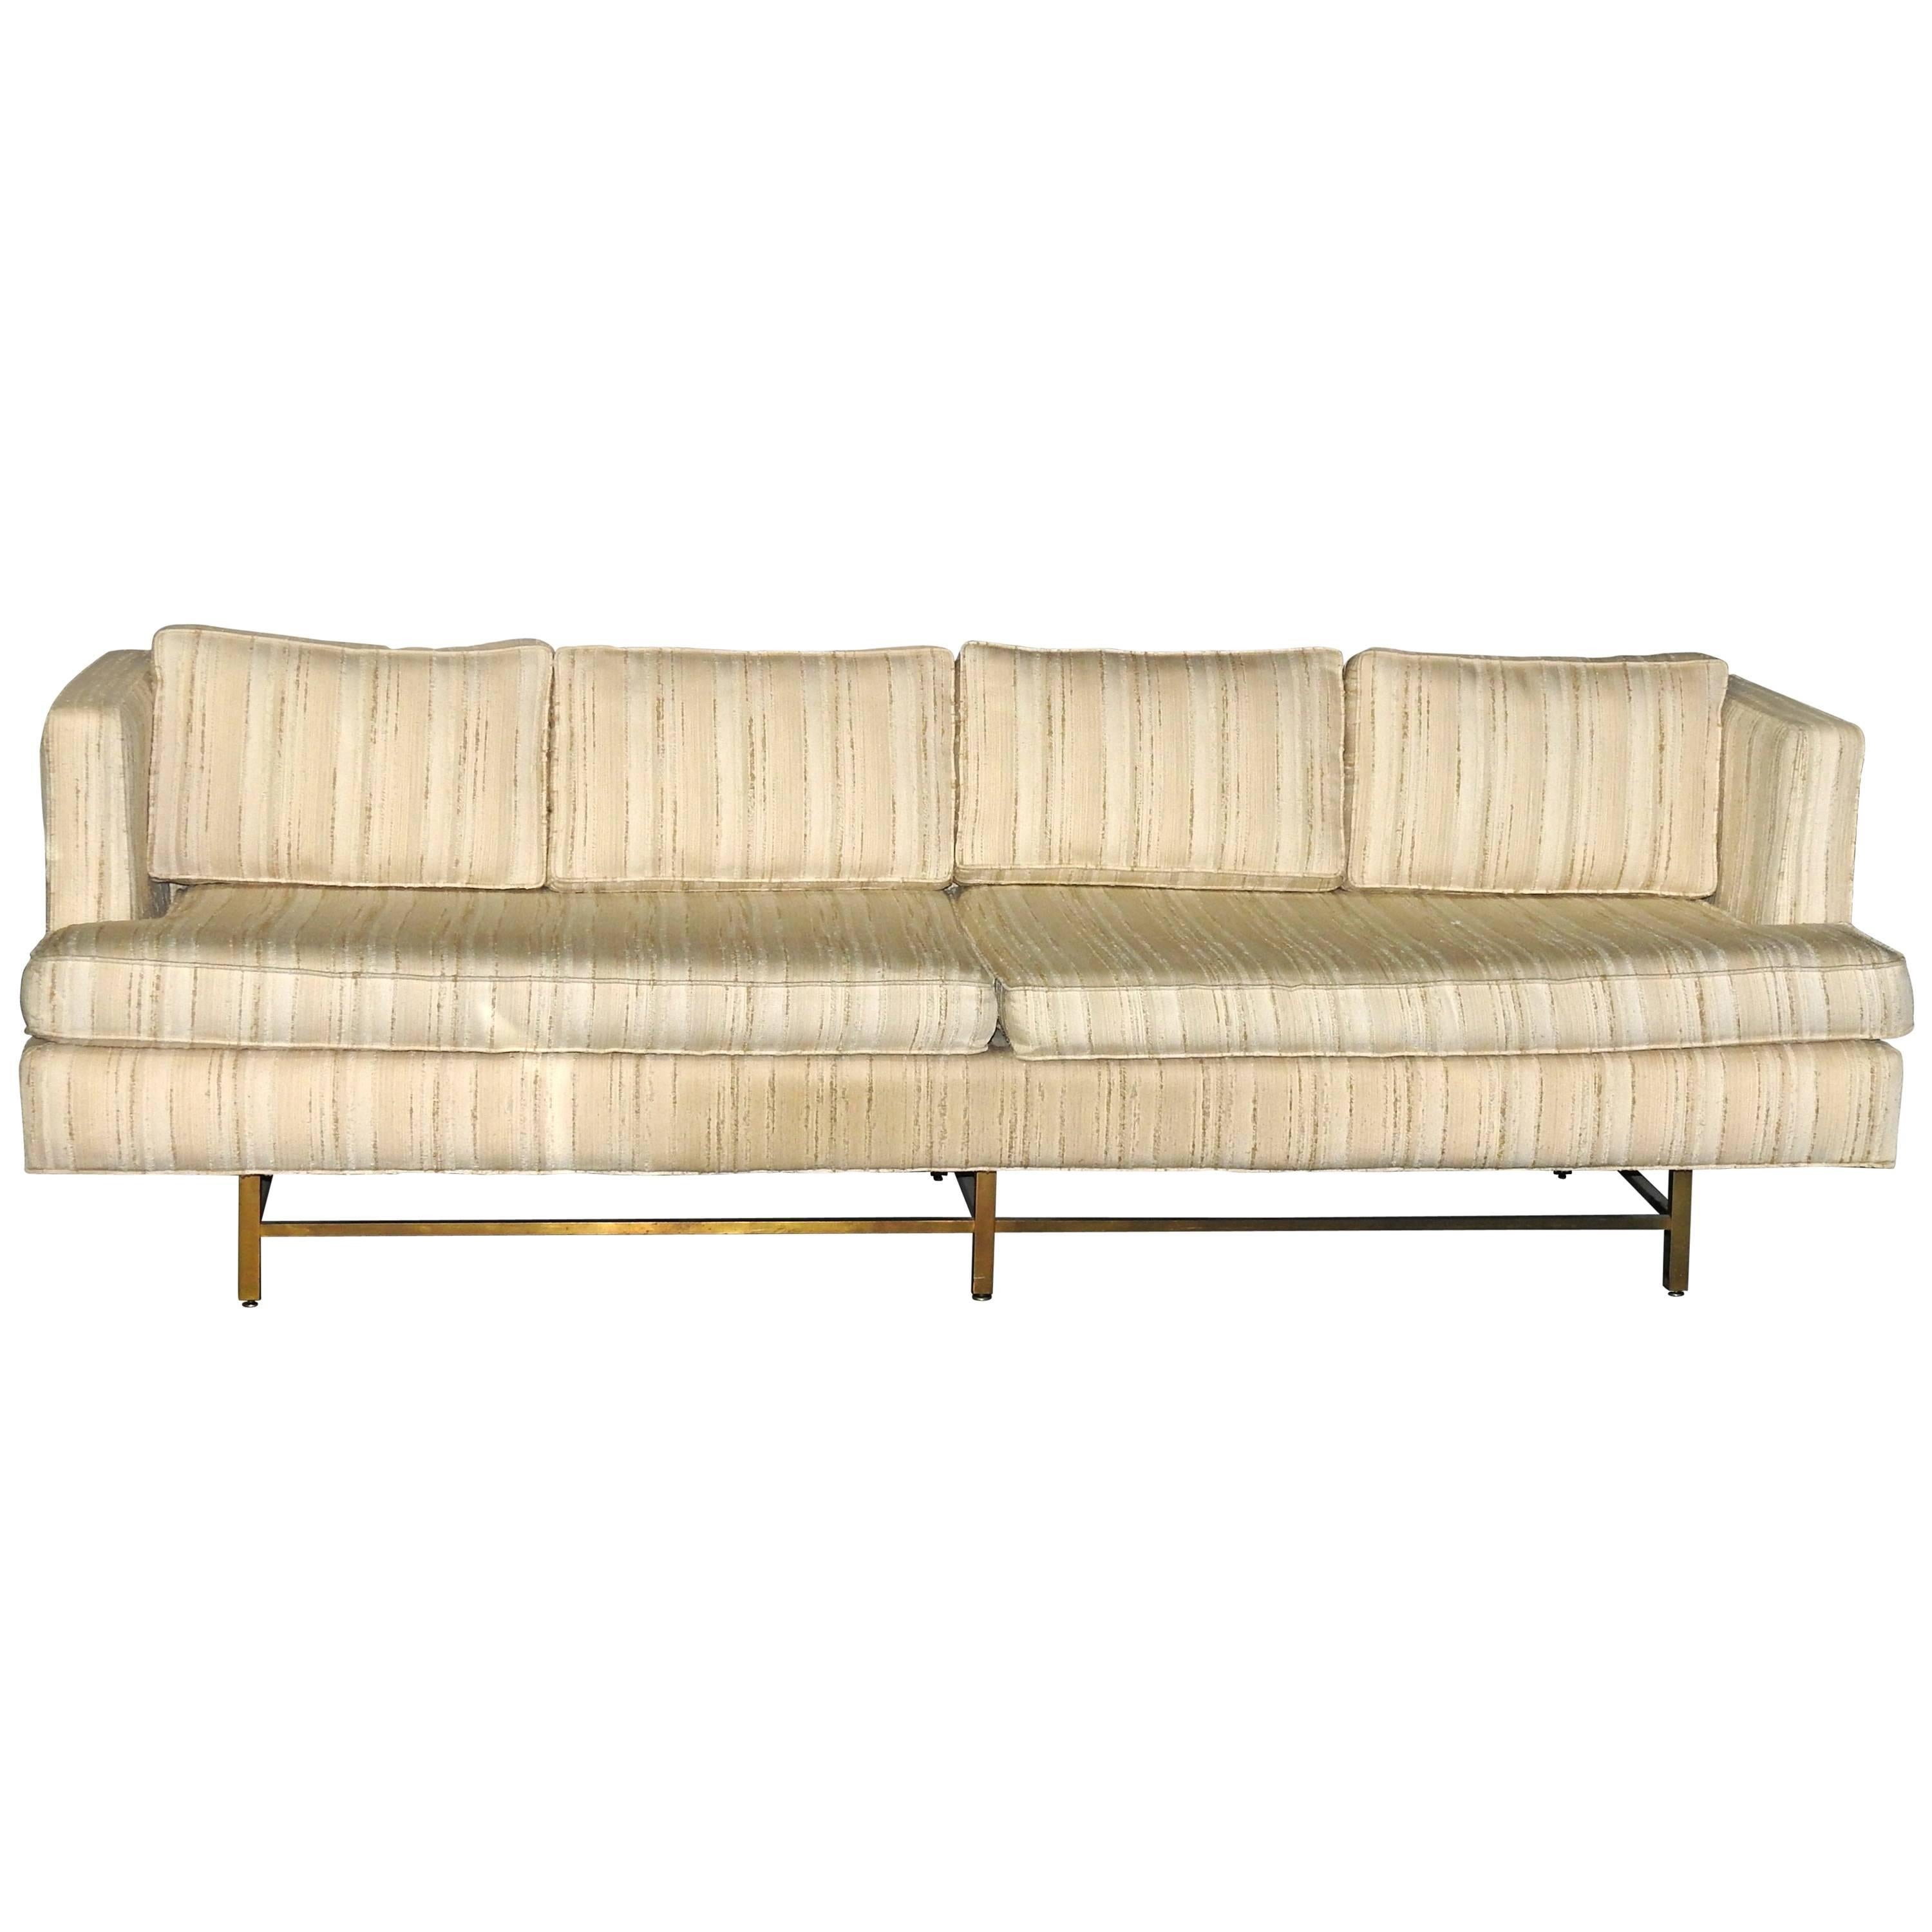 Outstanding Mid-Century Modern Couch by John Stuart For Sale